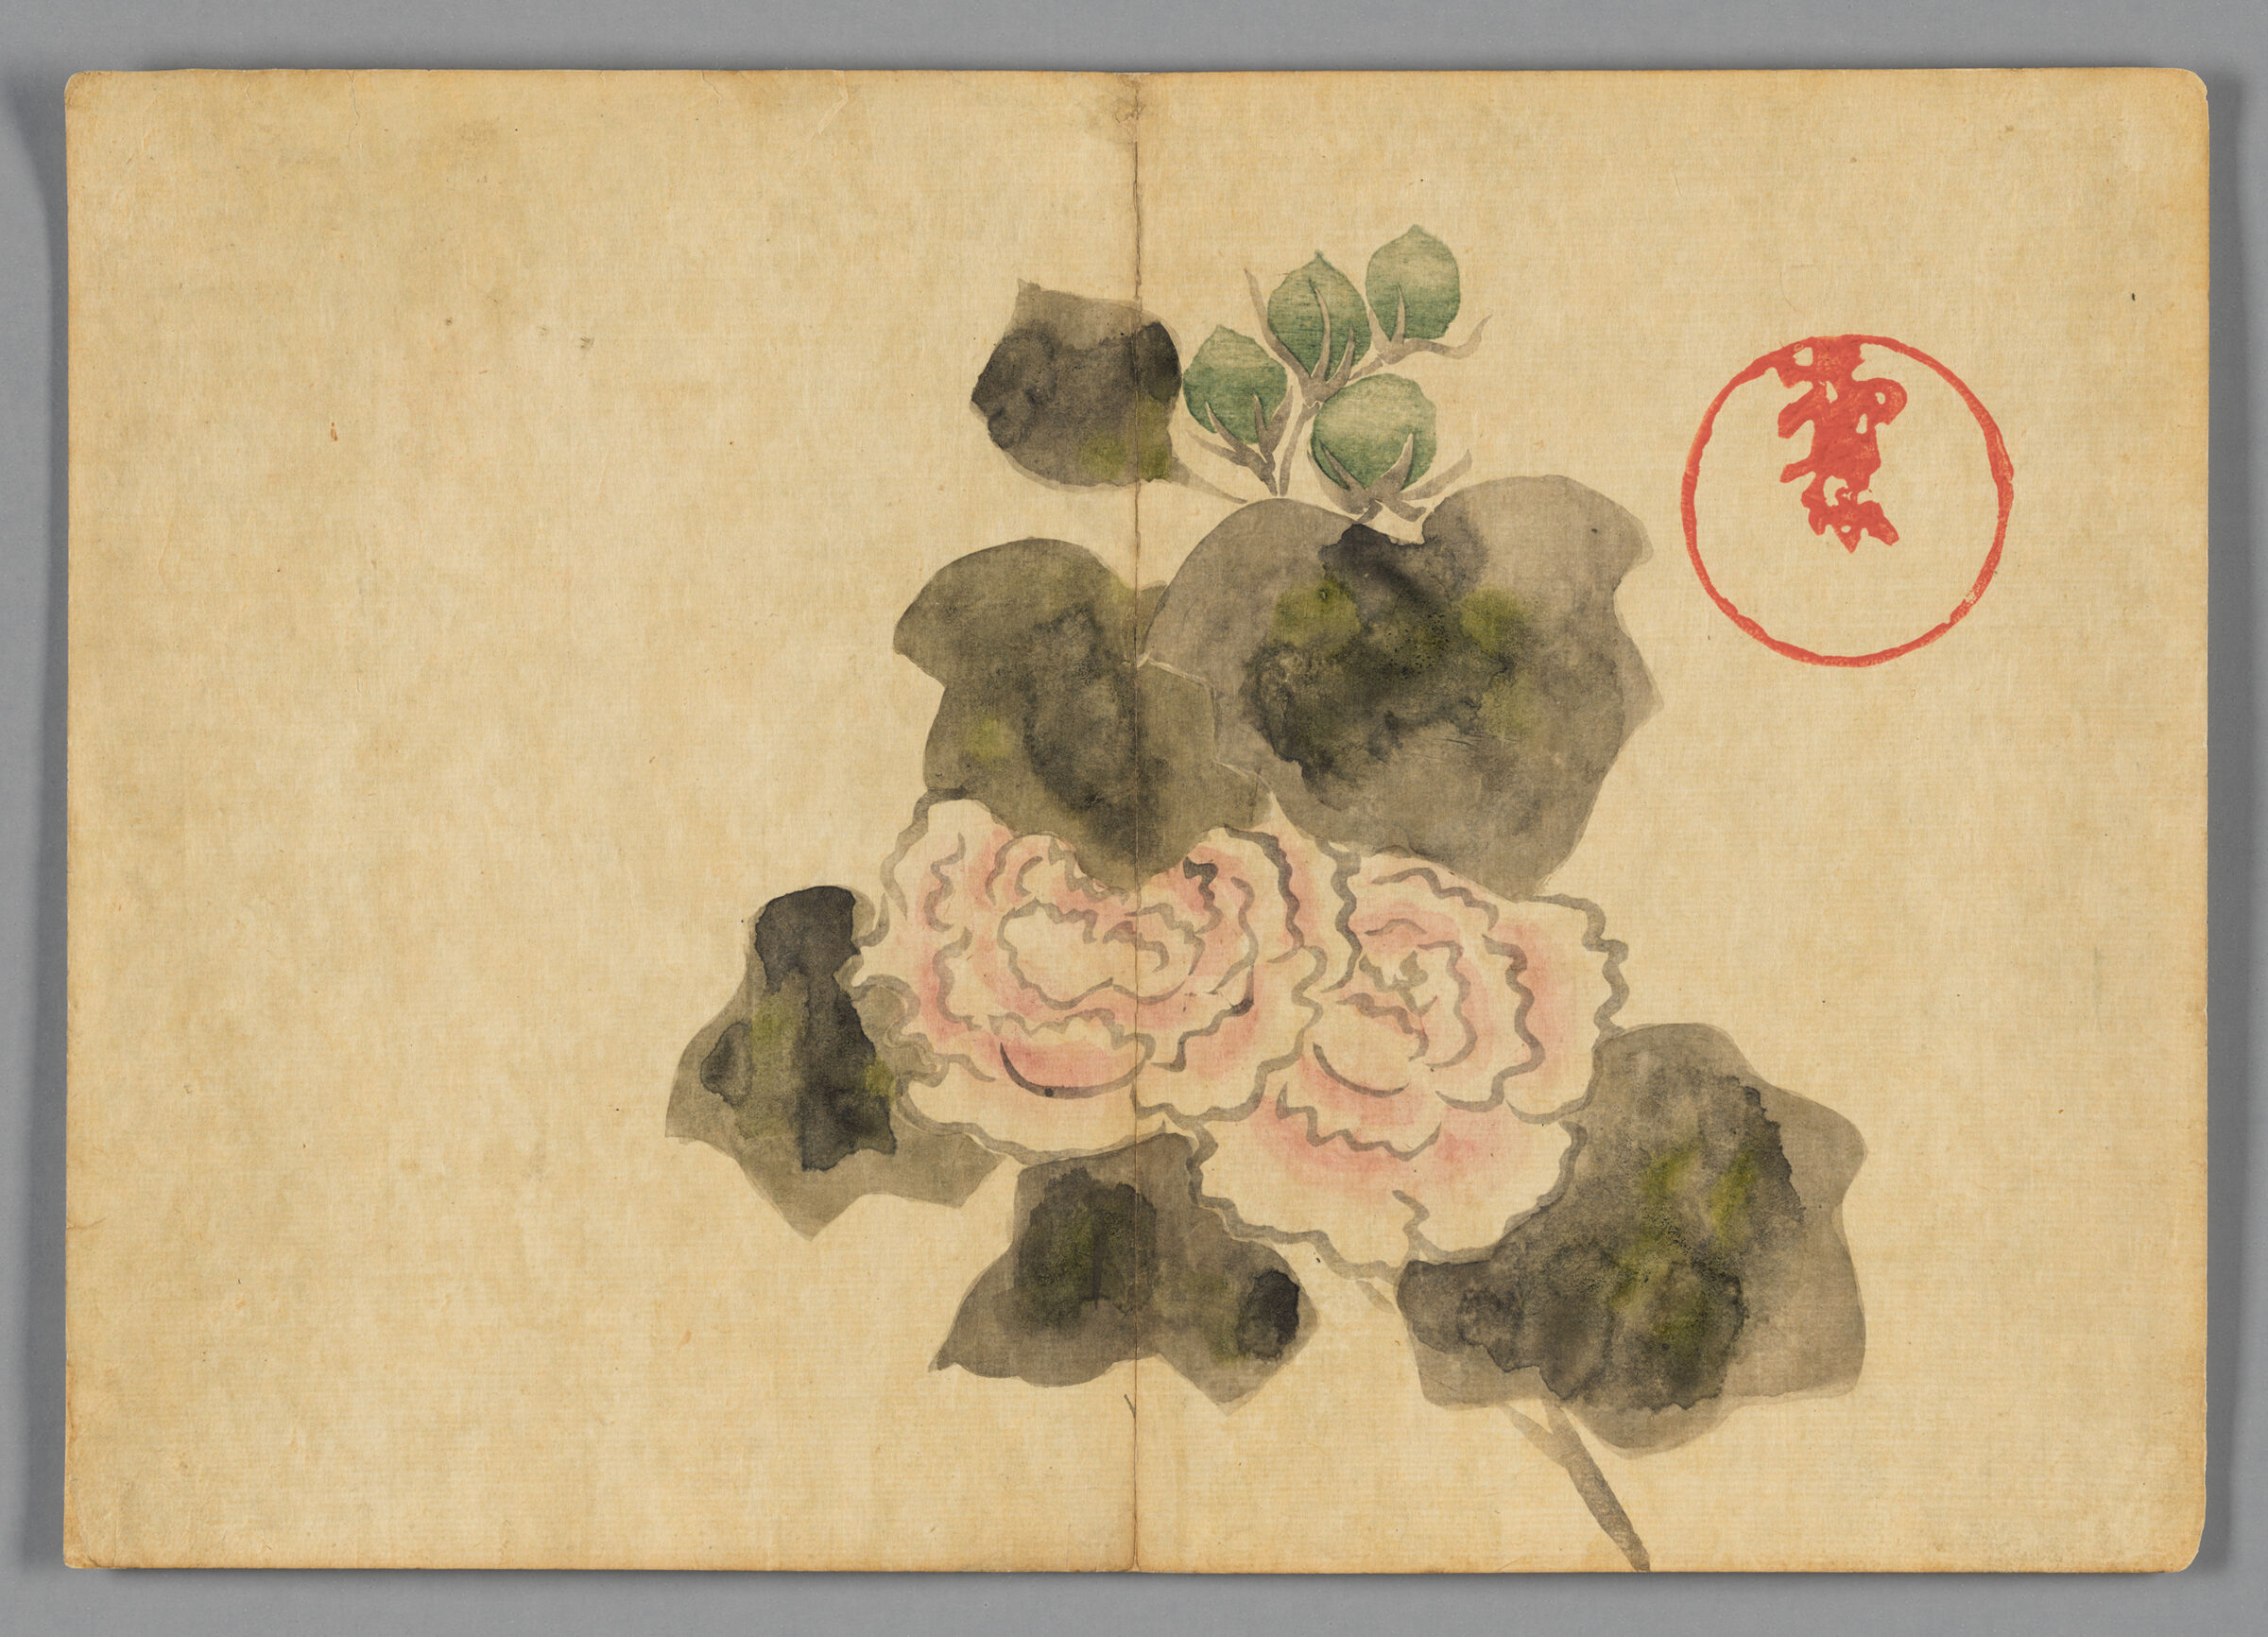 Peonies, From The Kōrin Gafu (Kōrin Picture Album)